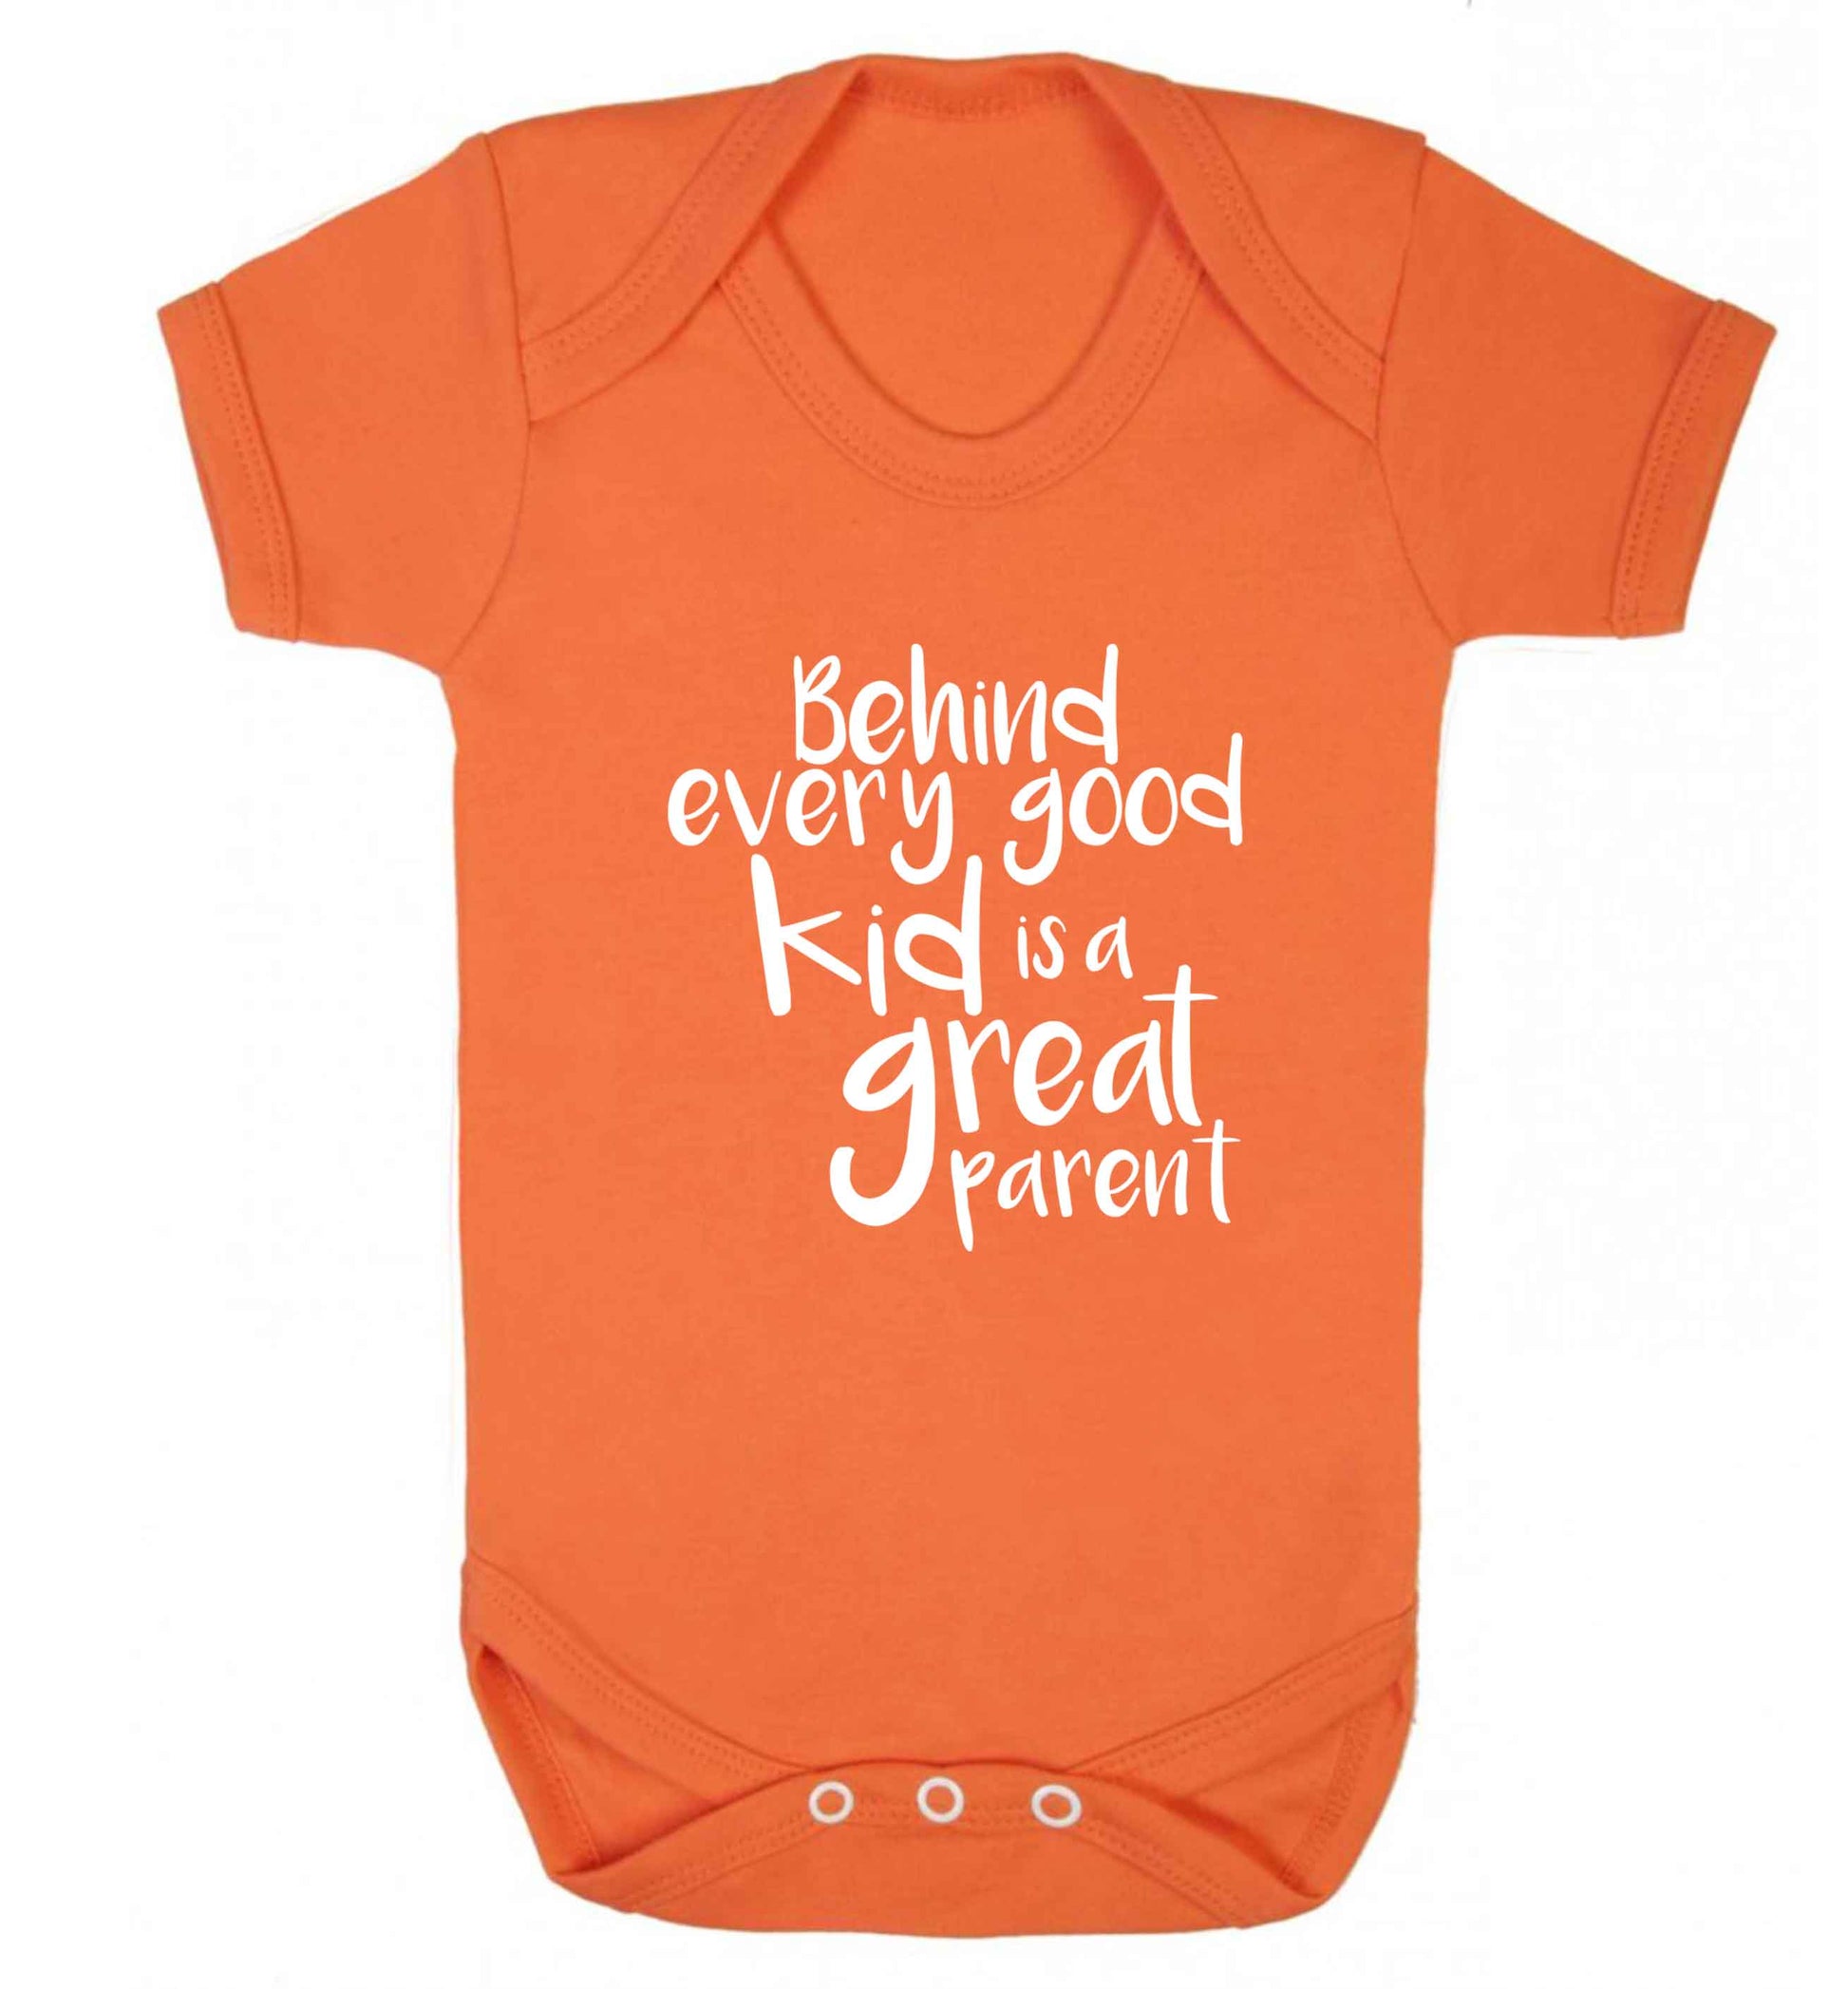 Behind every good kid is a great parent baby vest orange 18-24 months